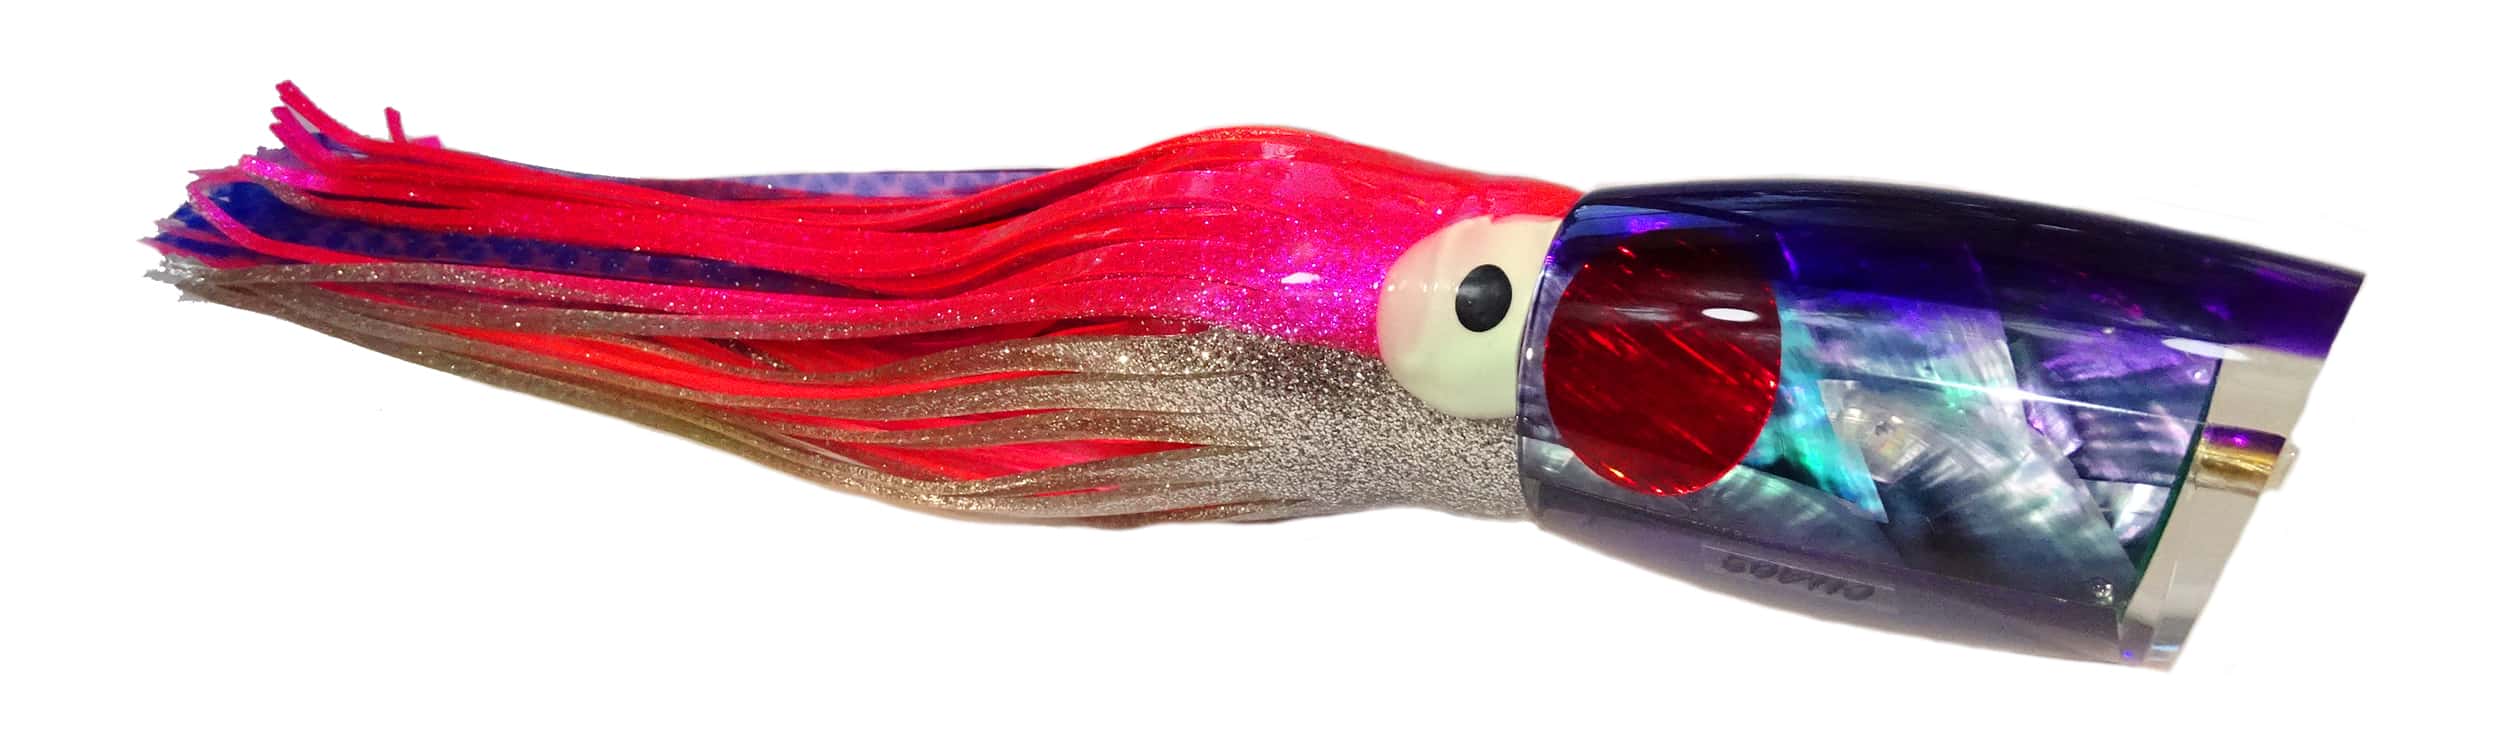 Frantic Lures - Chaos Series with Yo-Zuri Skirts